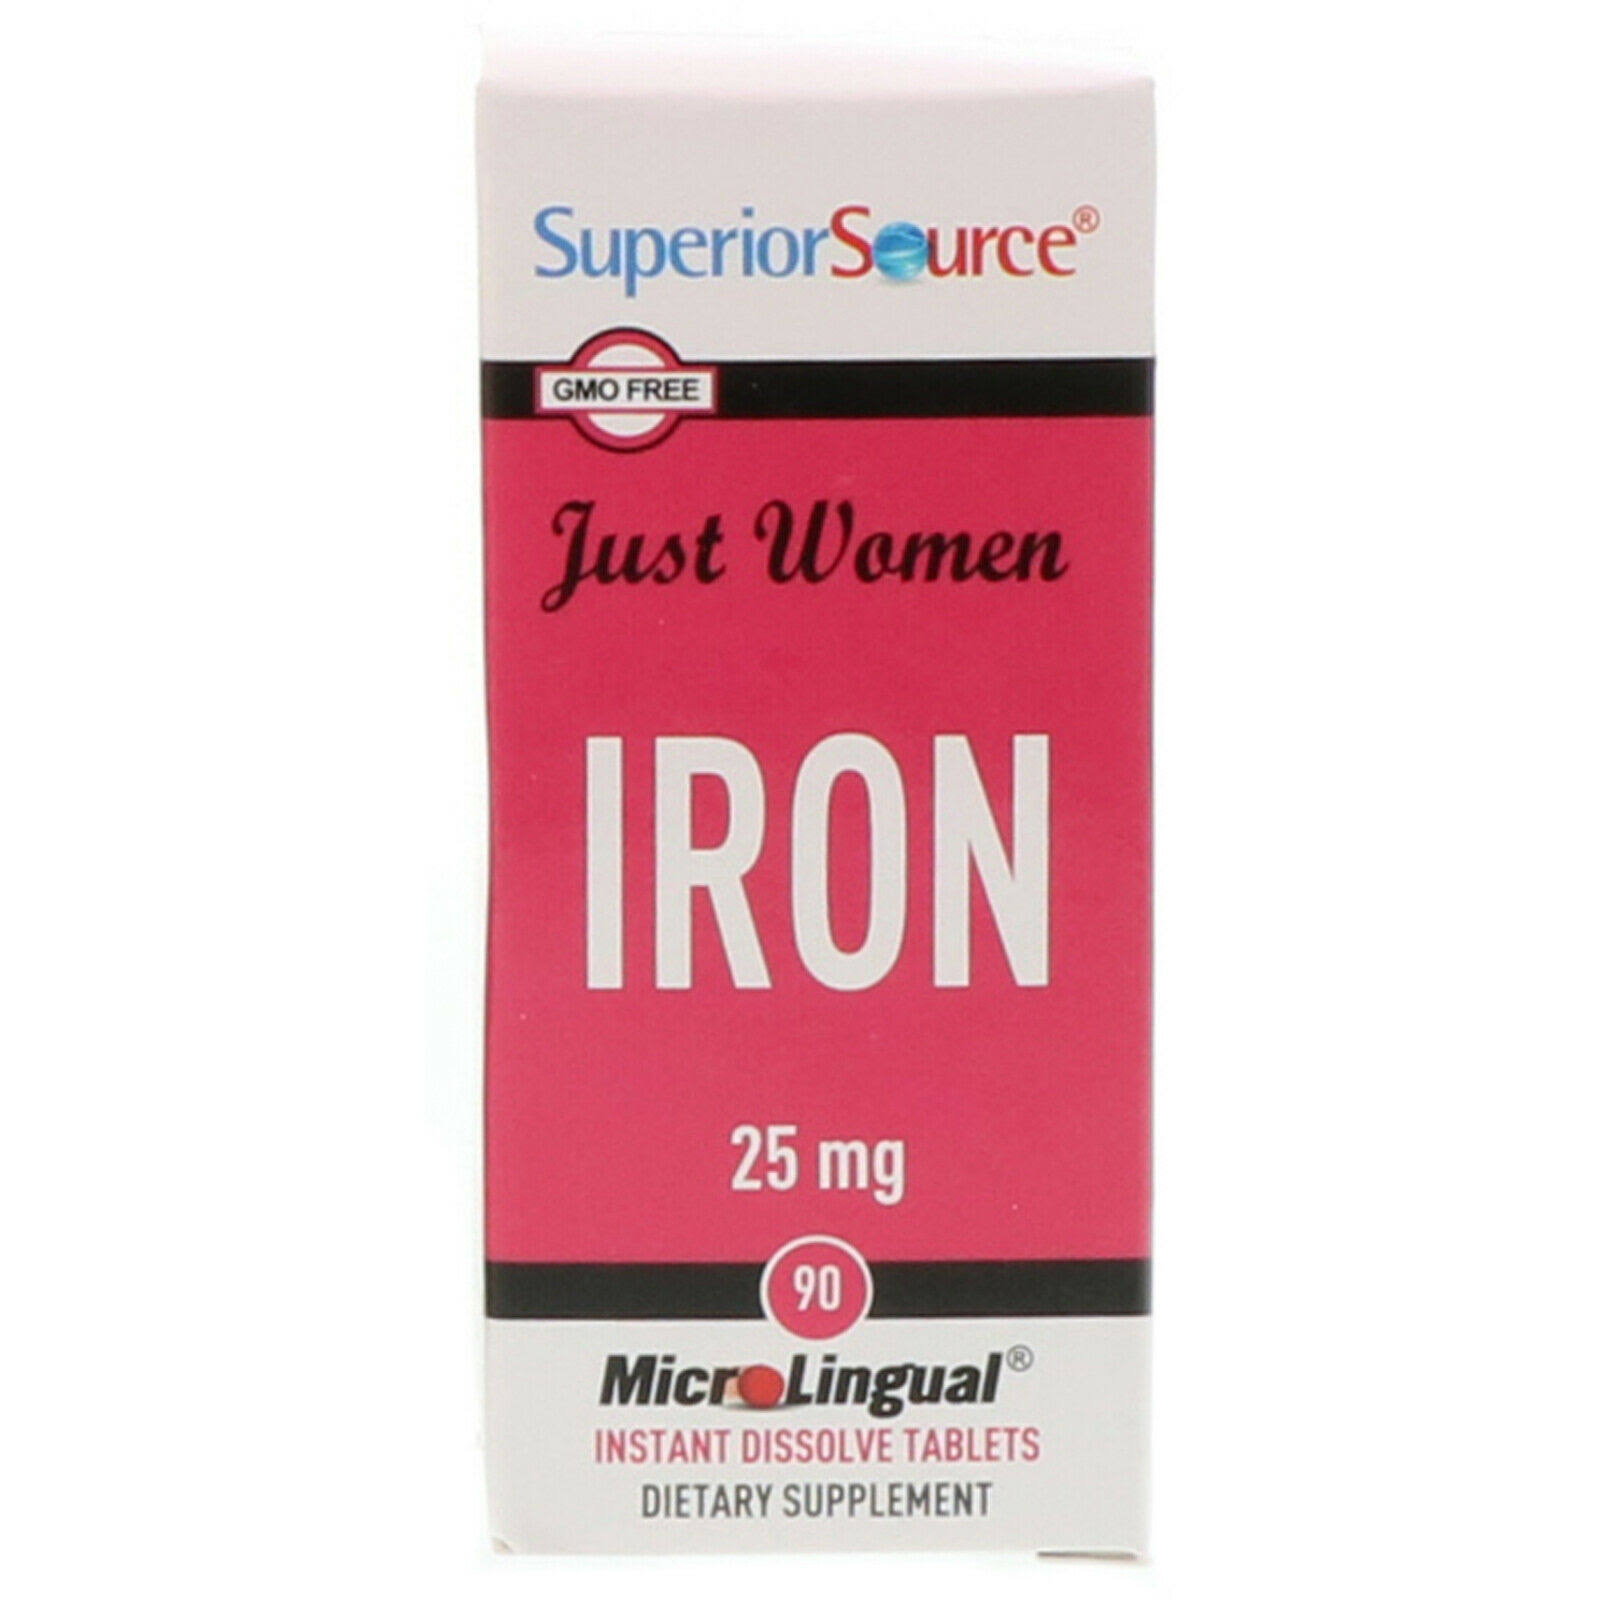 Superior Source Just Women Iron Ferrous Fumarate Tablets - 90ct, 25mg